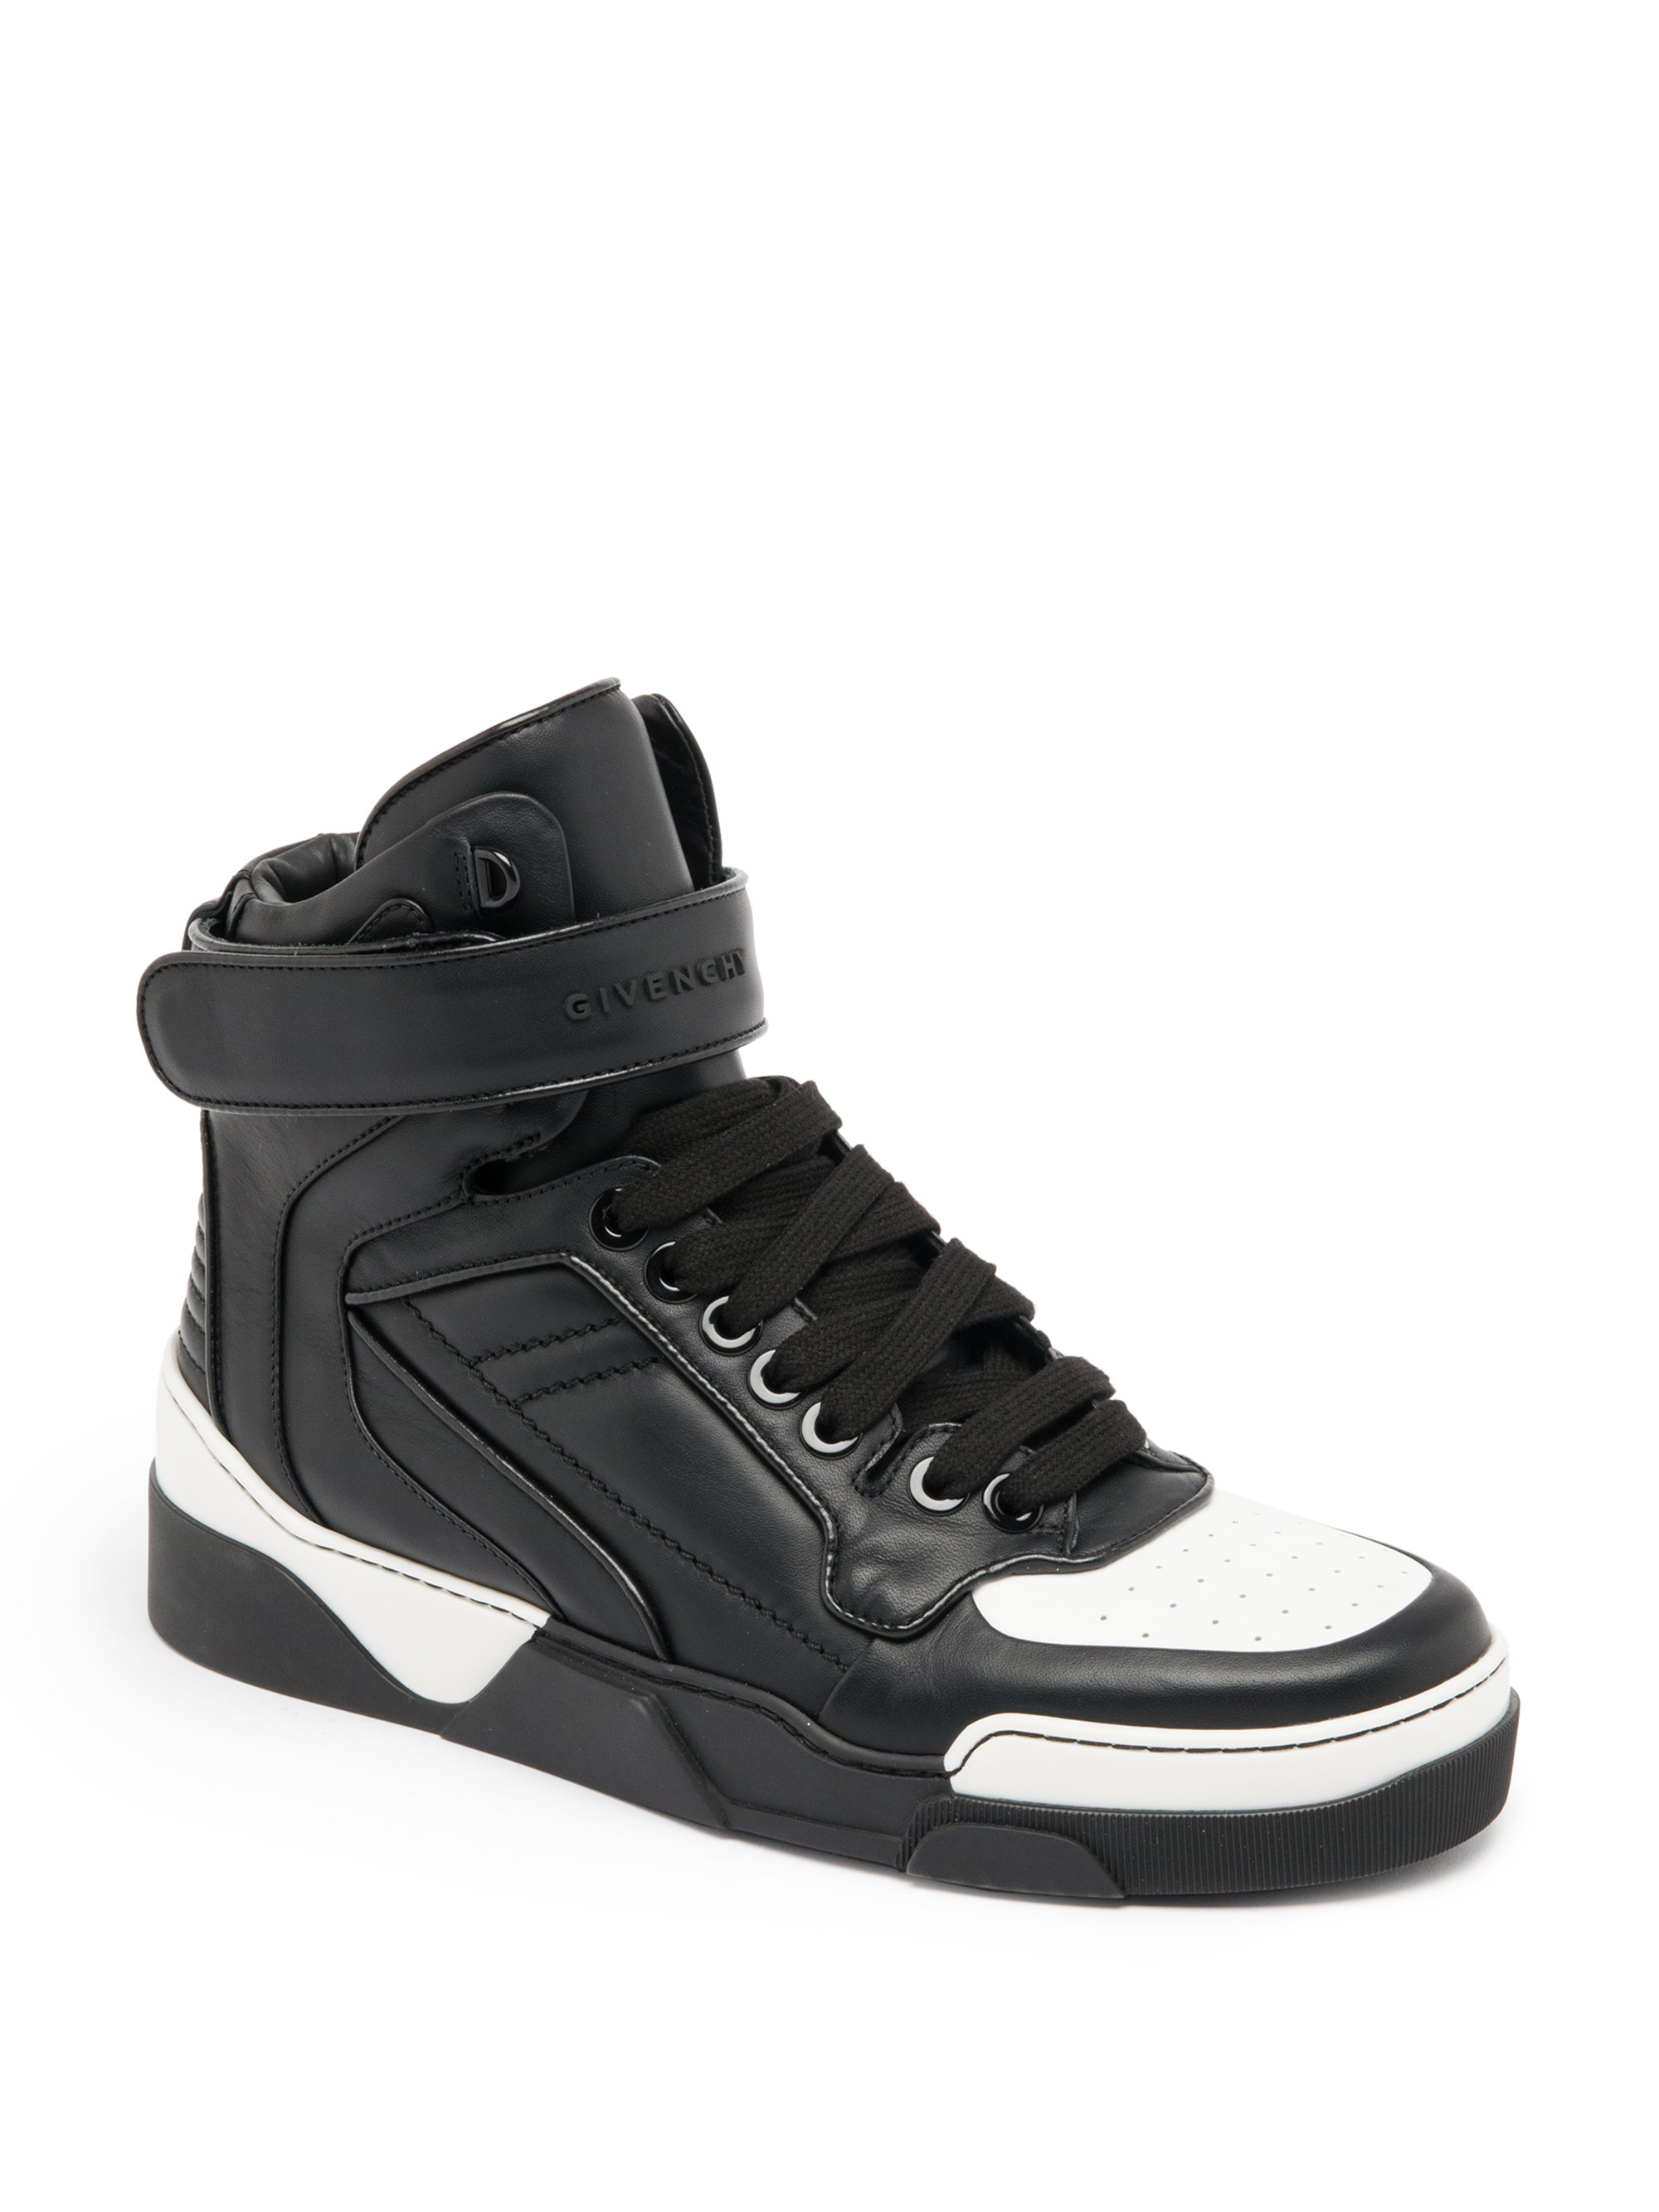 Lyst - Givenchy Tyson Leather High-top Sneakers in Black for Men